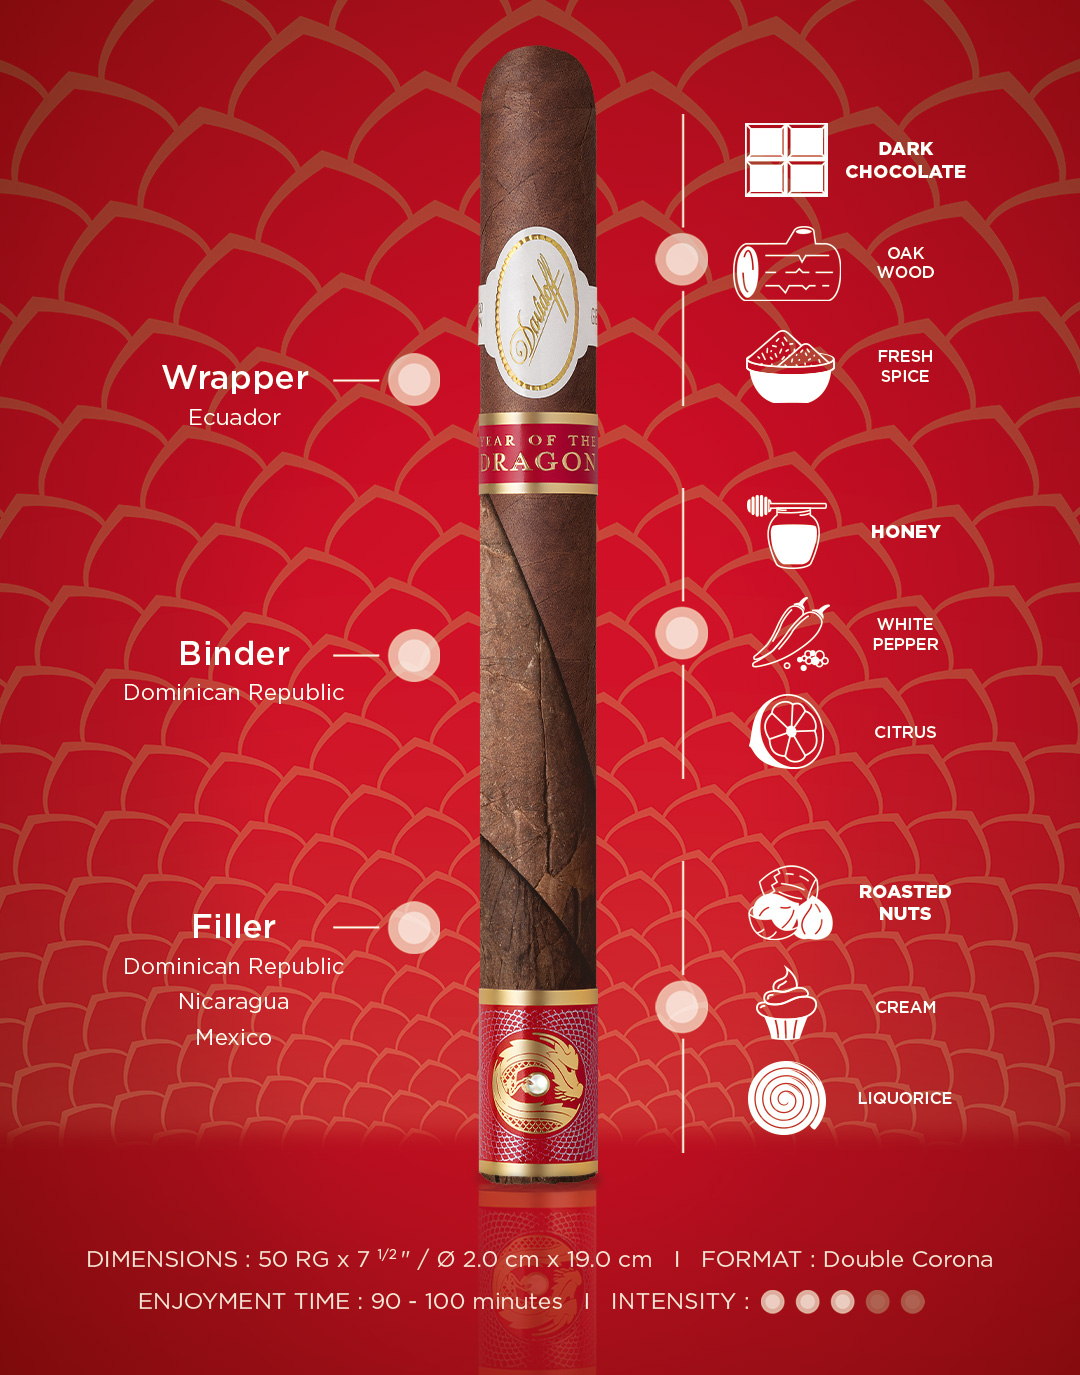 Blend breakdown taste banner of the Davidoff Year of the Dragon double corona cigar including aromas, enjoyment time, dimensions and intensity.